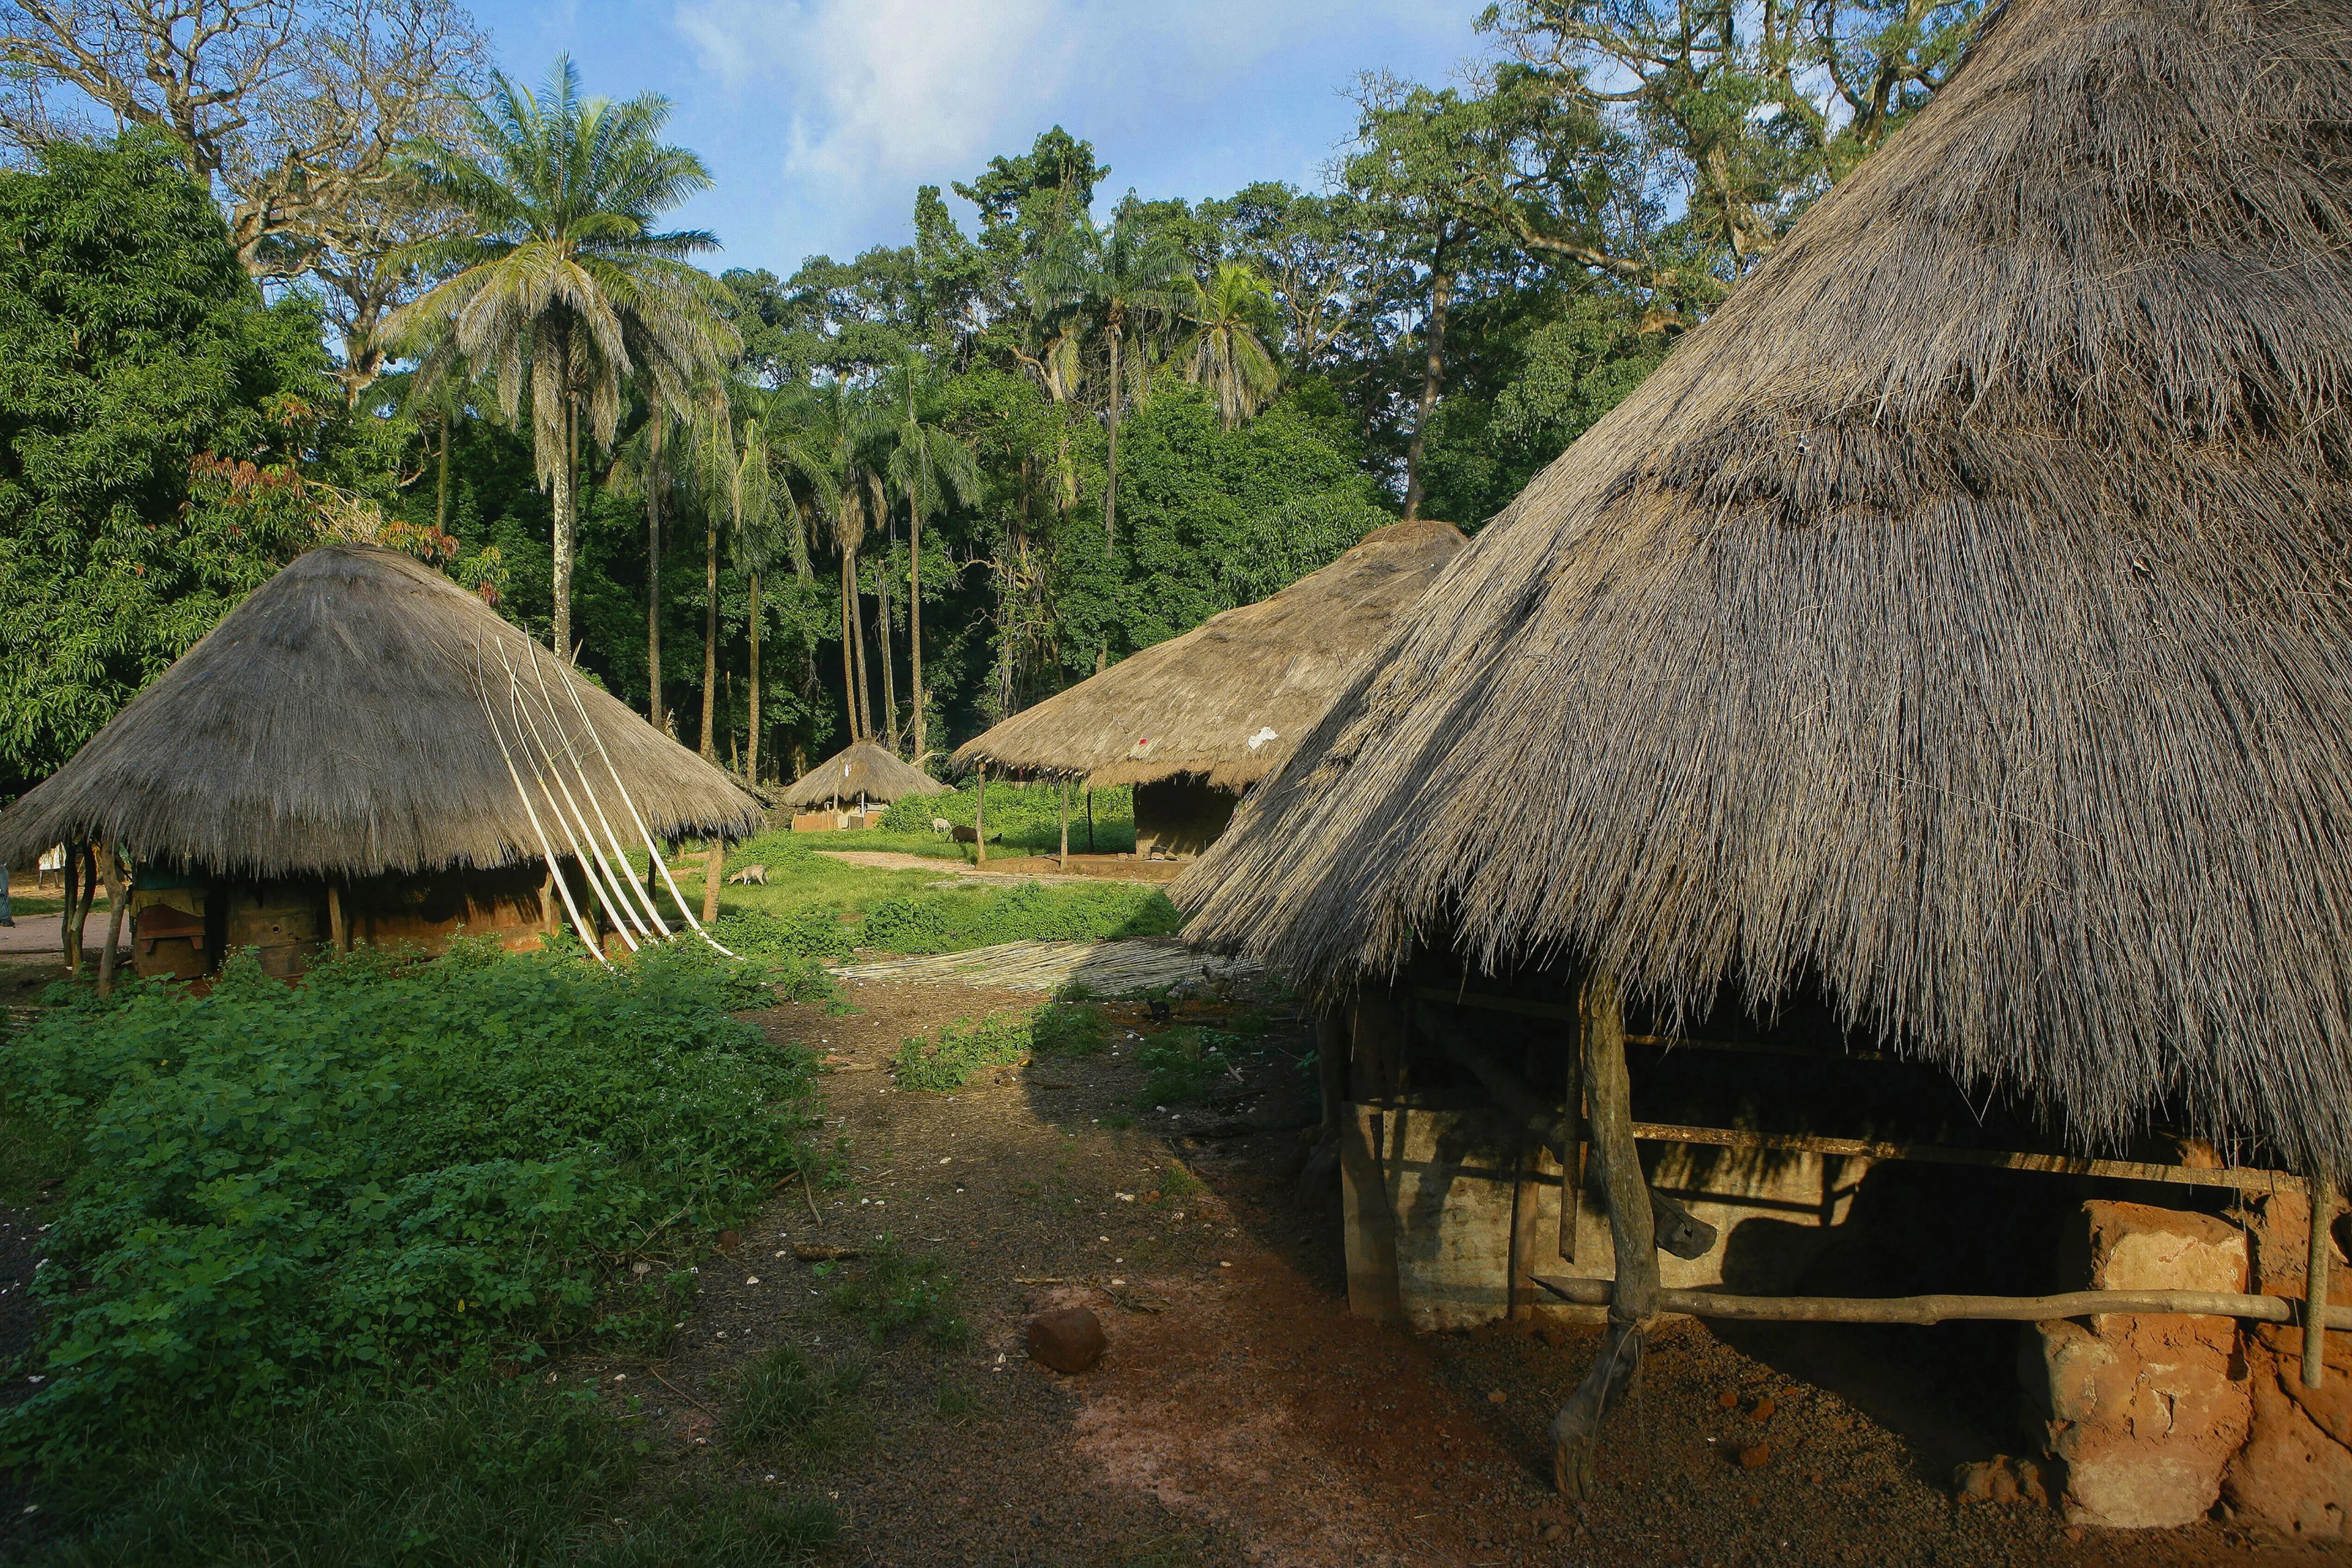 Traditional homes in Guinea-Bissau, West Africa. Photo Credit: Alamy